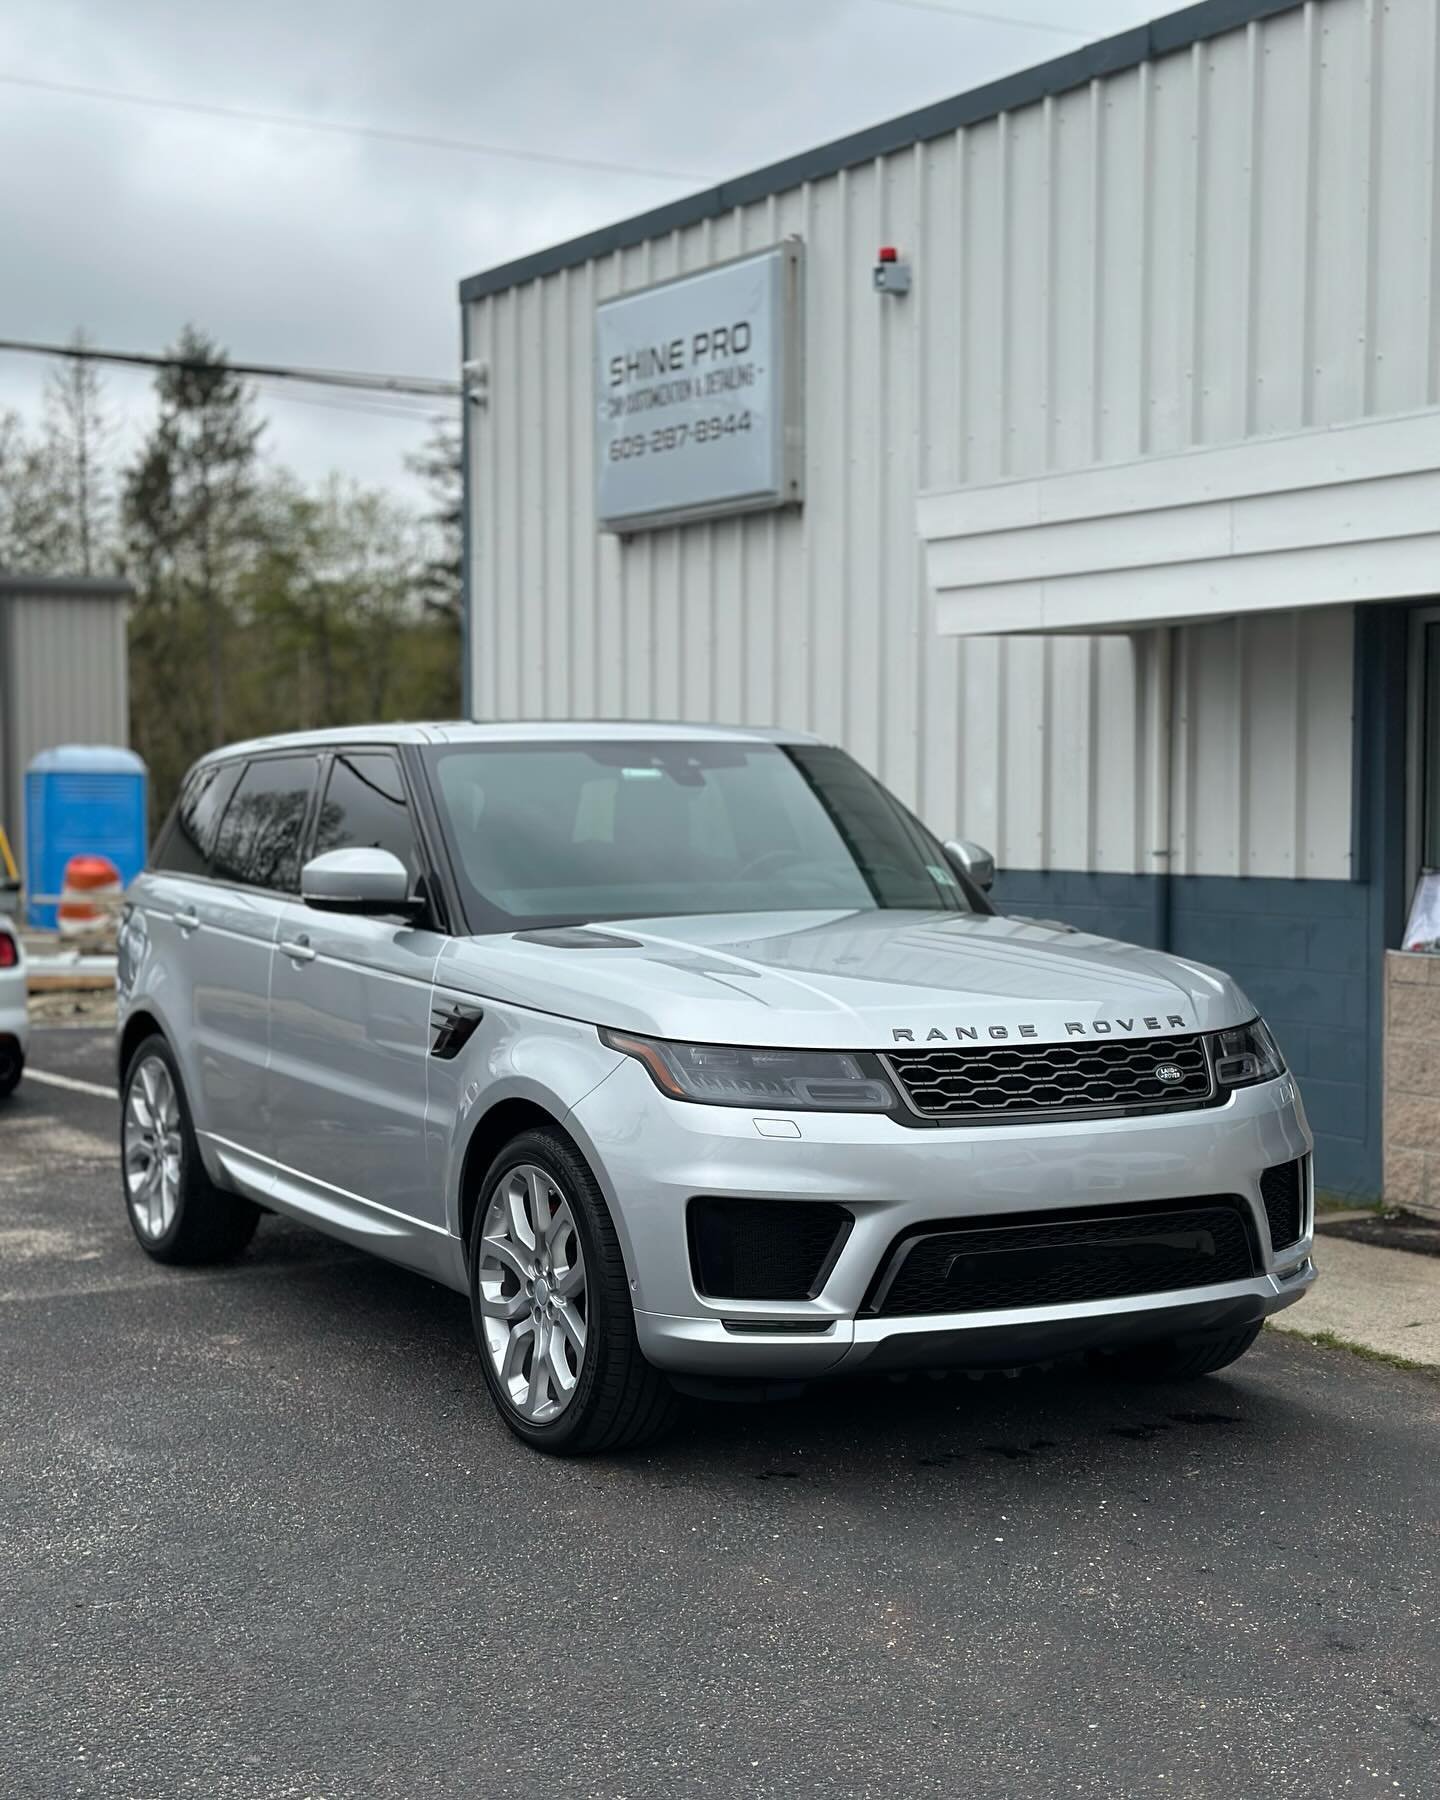 Protect Your Investment &trade;️

This 2020 Range Rover Sport HSE Dynamic needed a refresh for the pollen season 🌳

🧼 Deluxe Wash &amp; Wax

🔽 Find Us Here 

📱 (609) 287-8944
📧 shinepronj@gmail.com
💻 www.shinepronj.com

💎💎💎

#xpel #xpelsteal